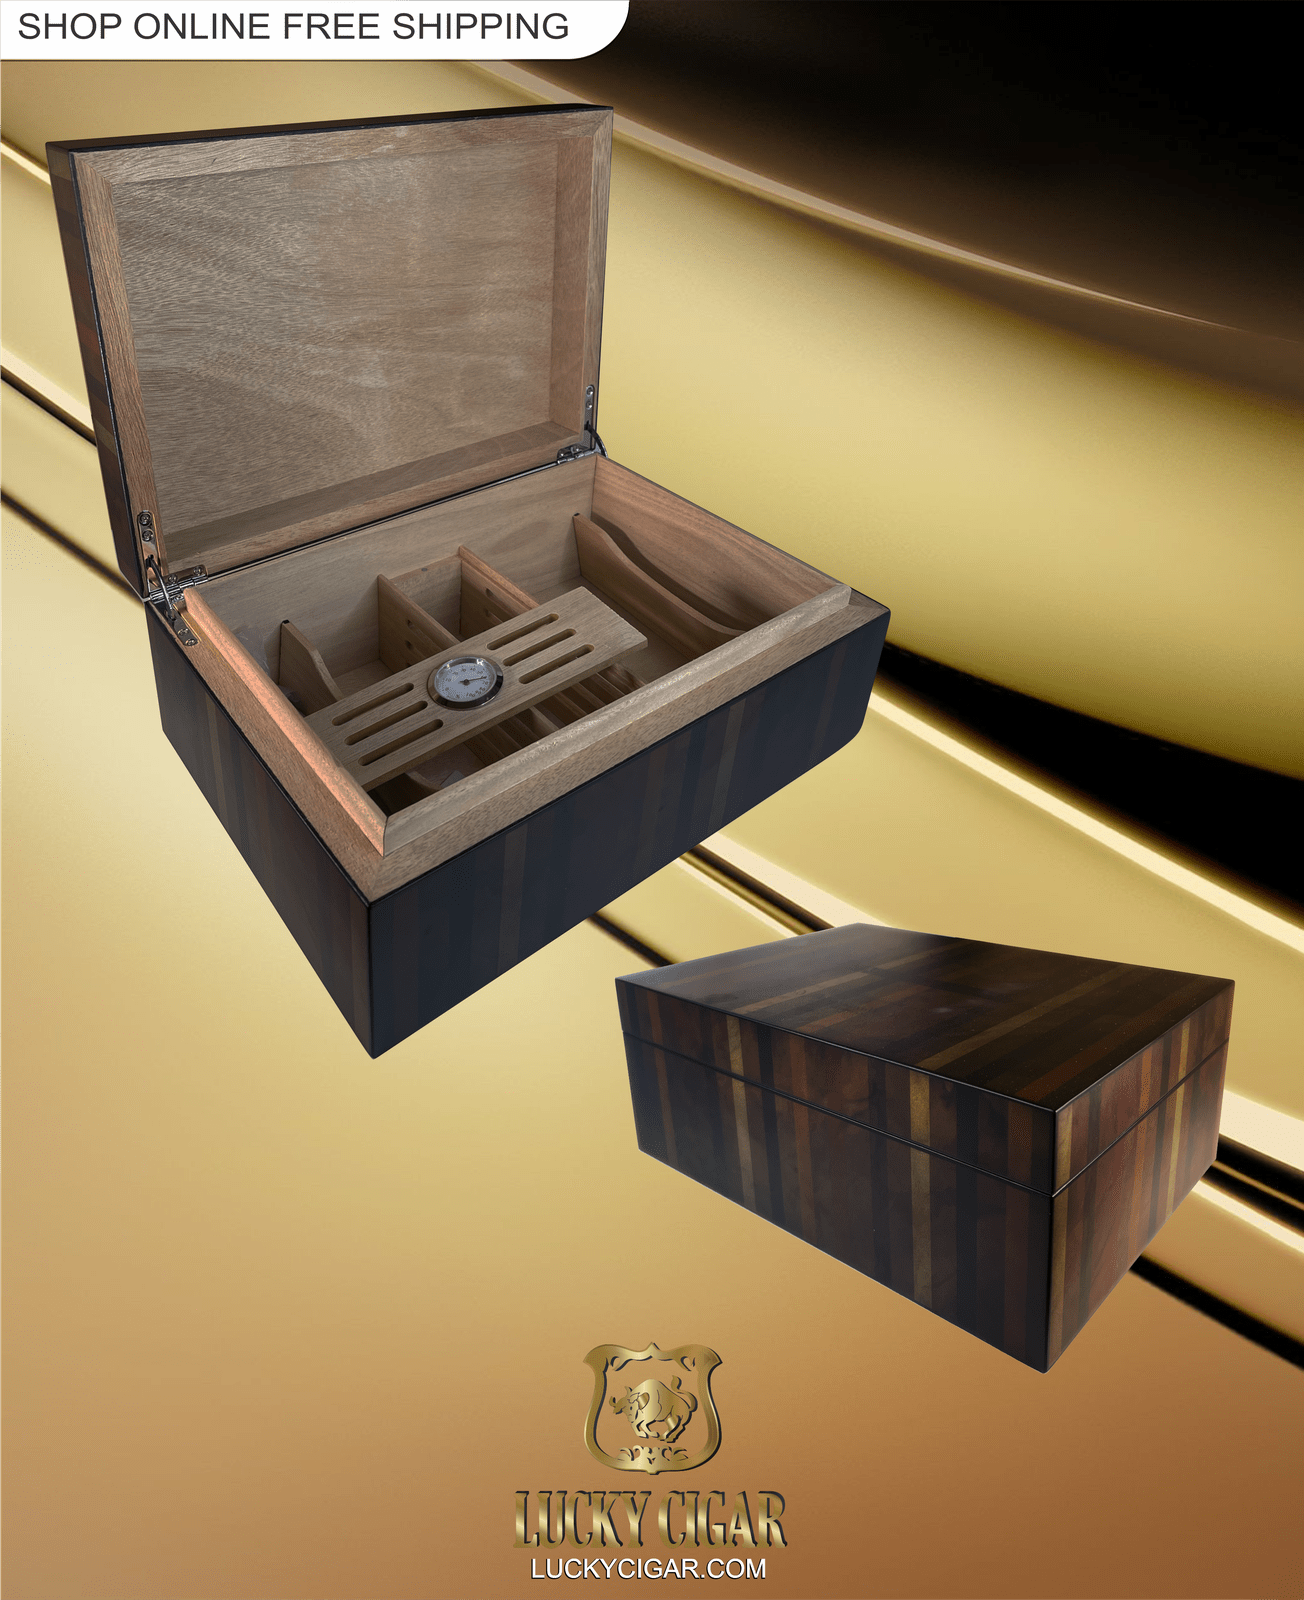 Cigar Lifestyle Accessories: Desk Humidor with Striped Wood holds 50 Cigars